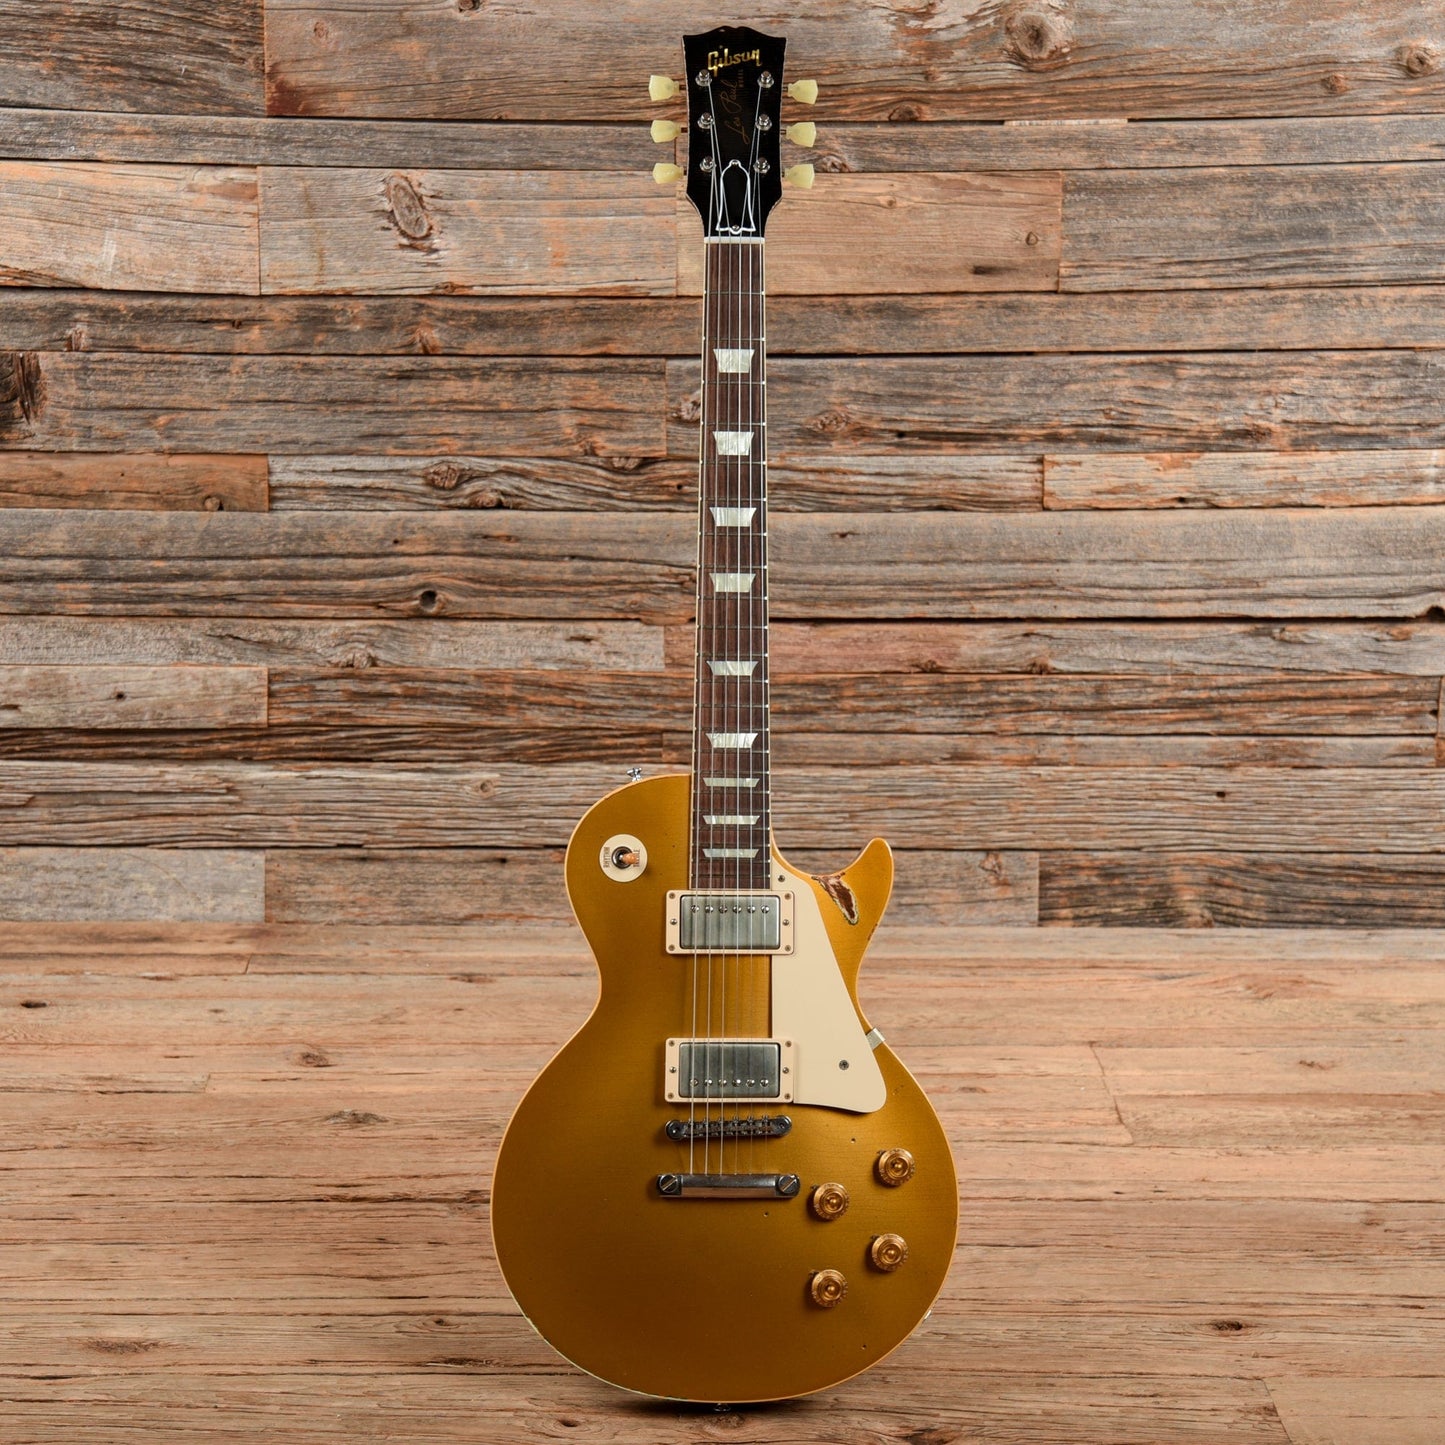 Gibson Collector's Choice #36 "Goldfinger" '57 Les Paul Reissue Goldtop 2016 Electric Guitars / Solid Body